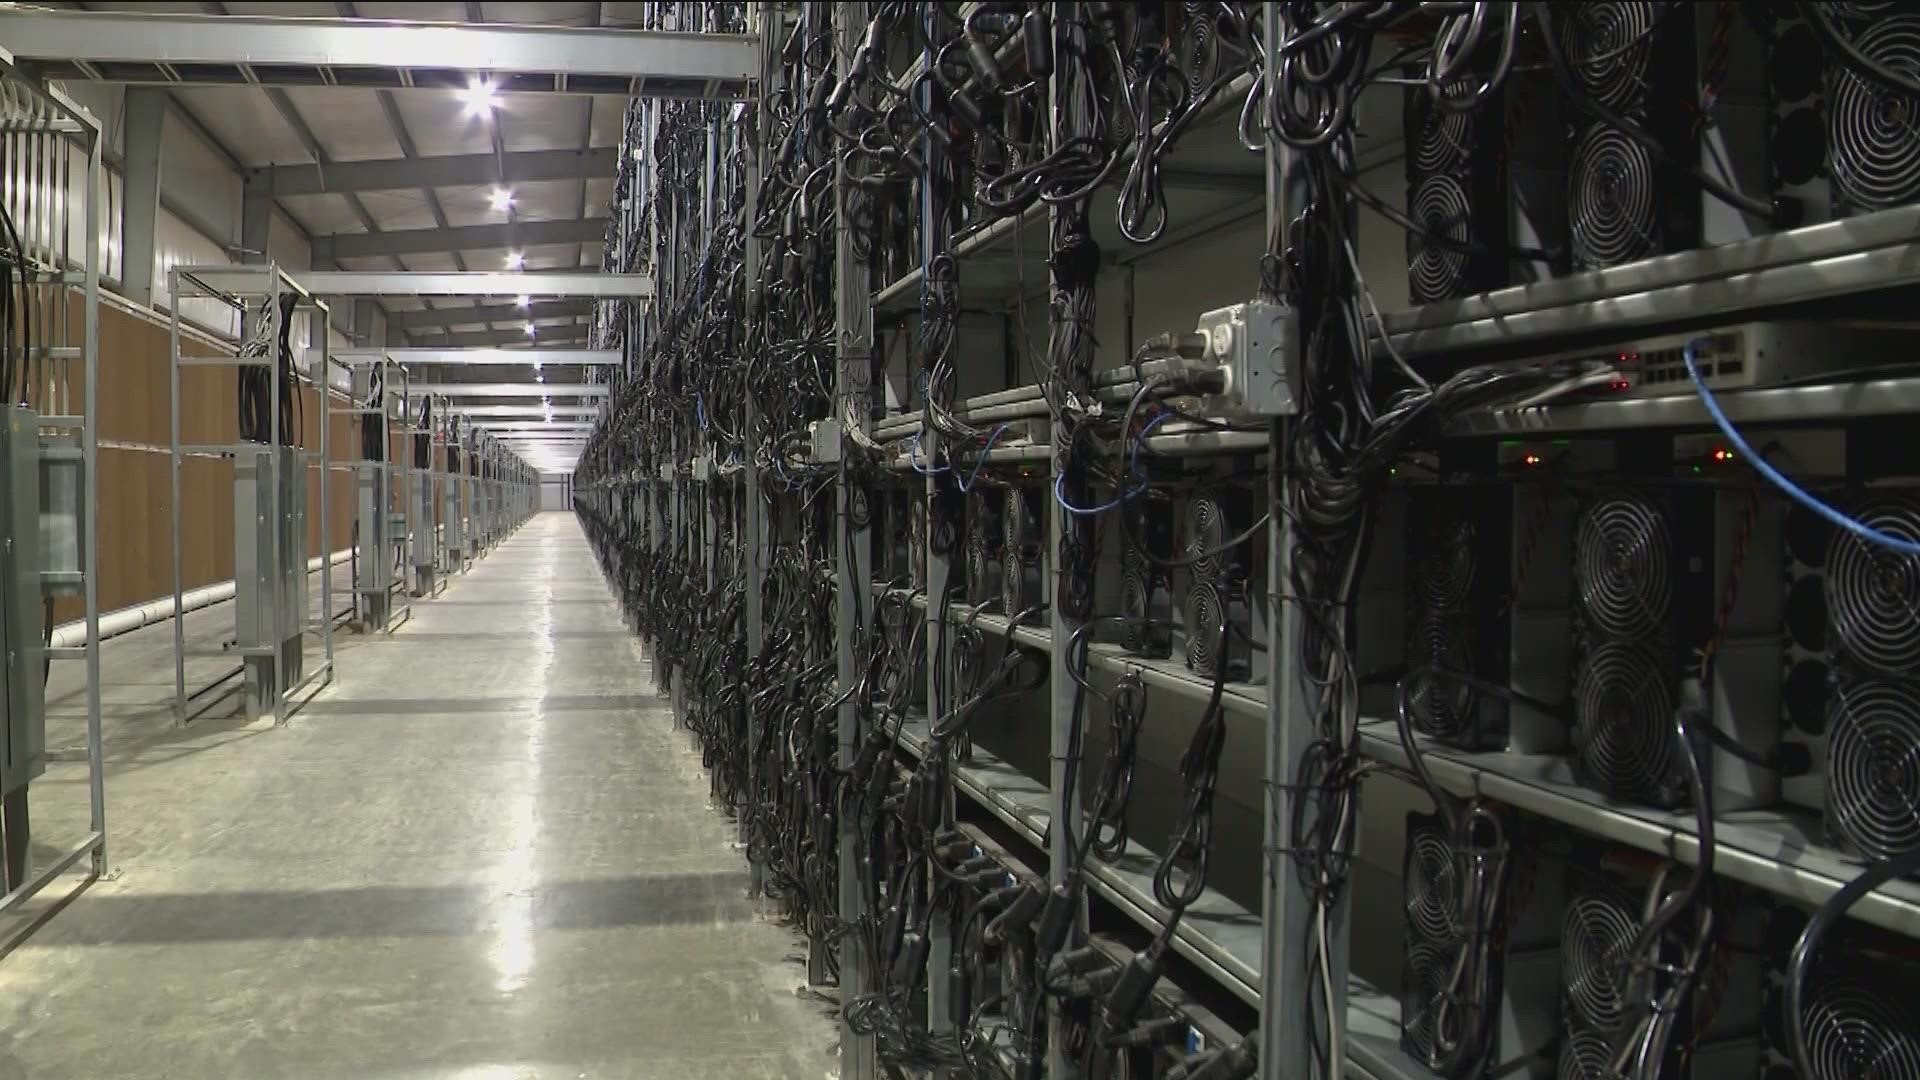 The President of the Texas Blockchain Council told Bloomberg that more than 1,000 MW-worth of bitcoin mining load turned their machines off on Monday.